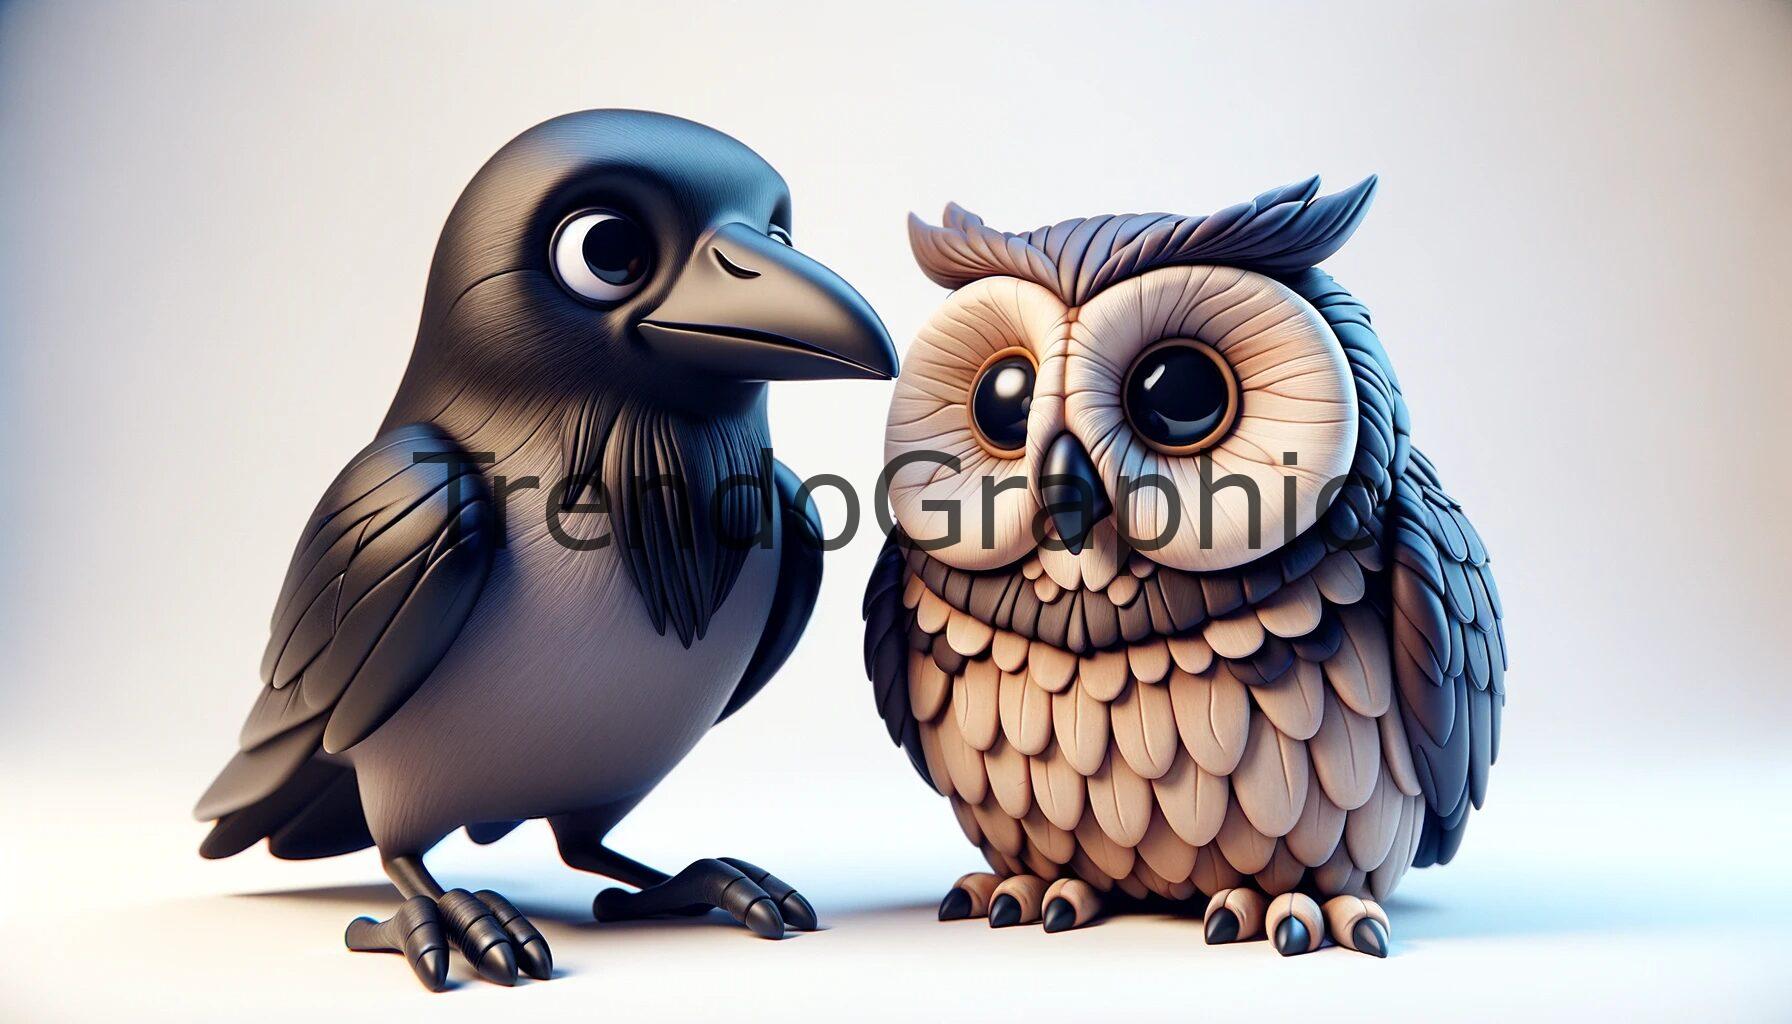 Conversation Between a Crow and an Owl